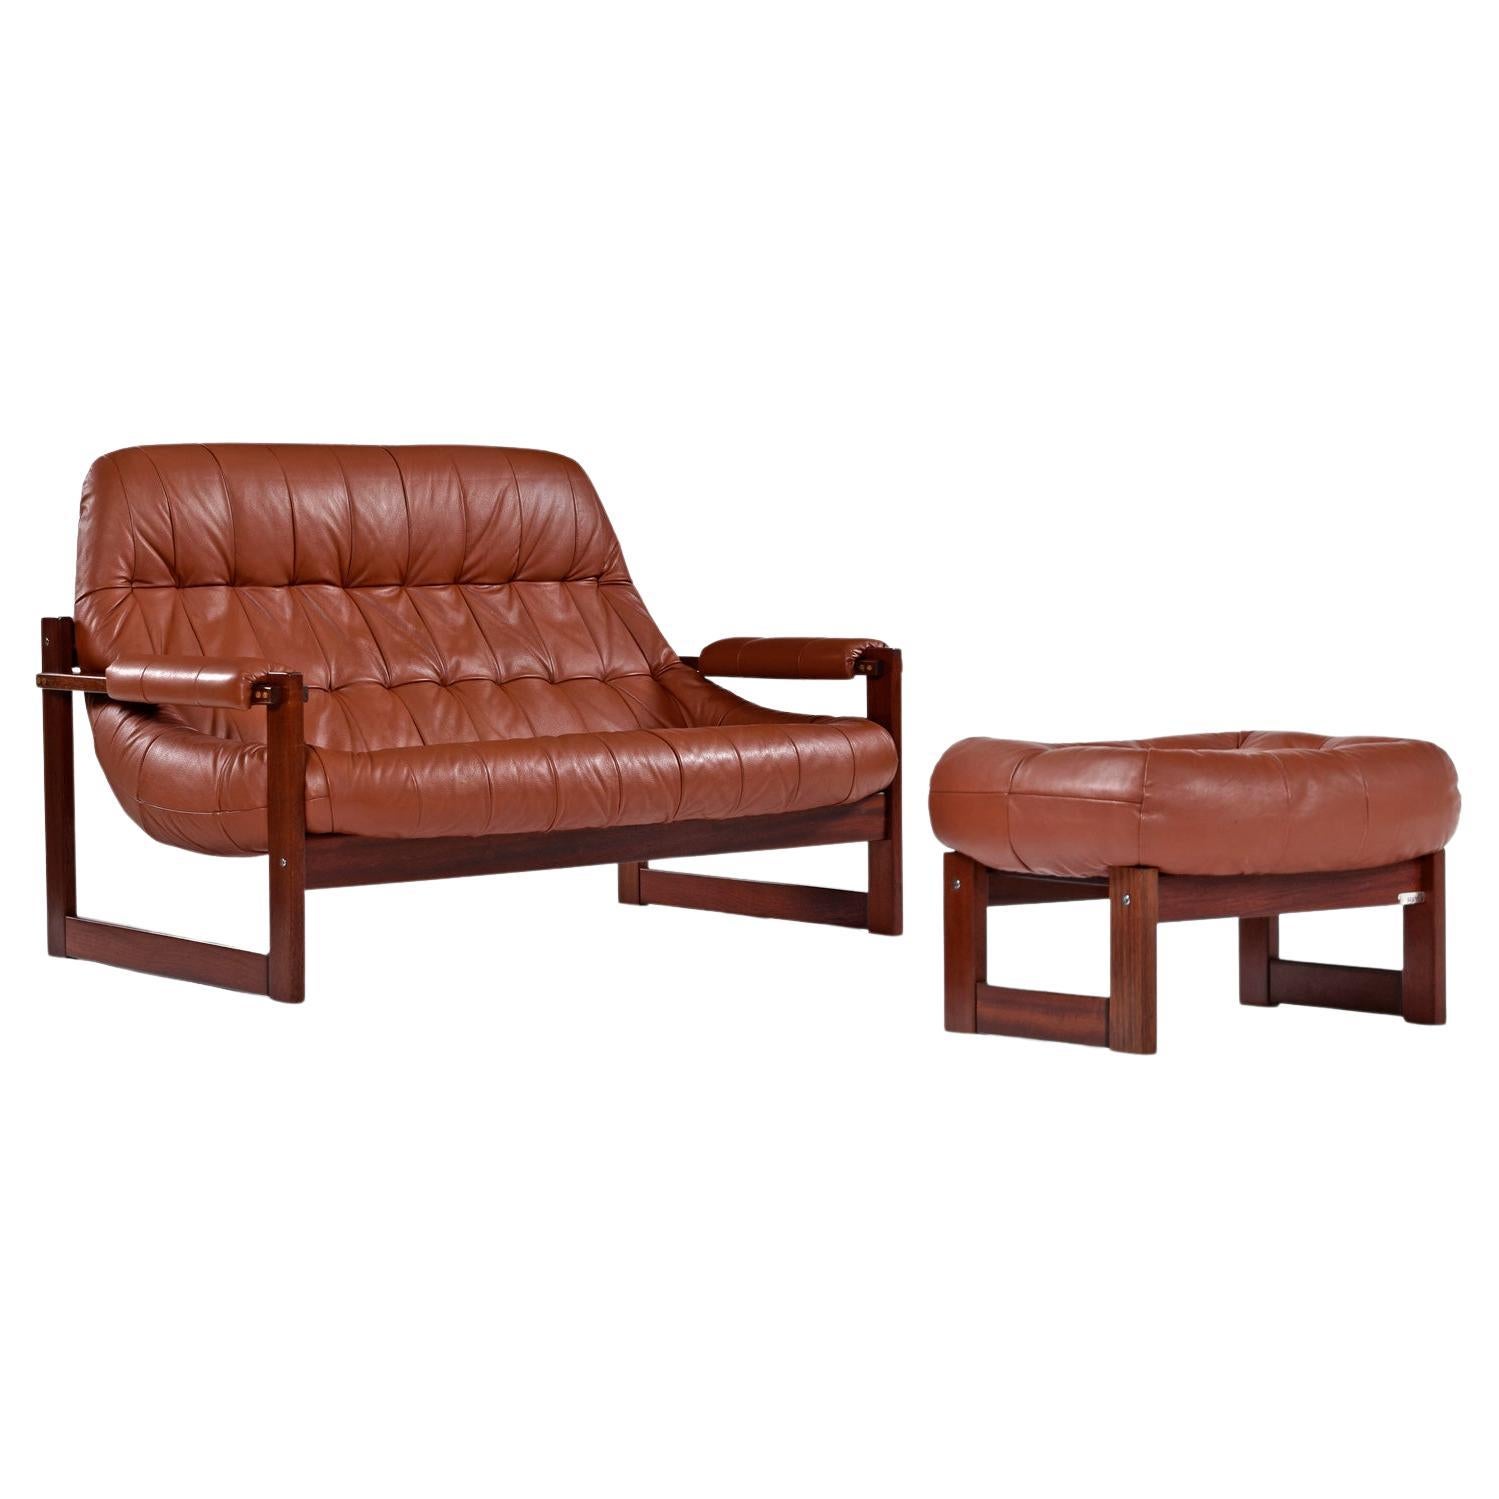 Rosewood & Cognac Leather Mp-163 "Earth" Loveseat & Ottoman by Percival Lafer